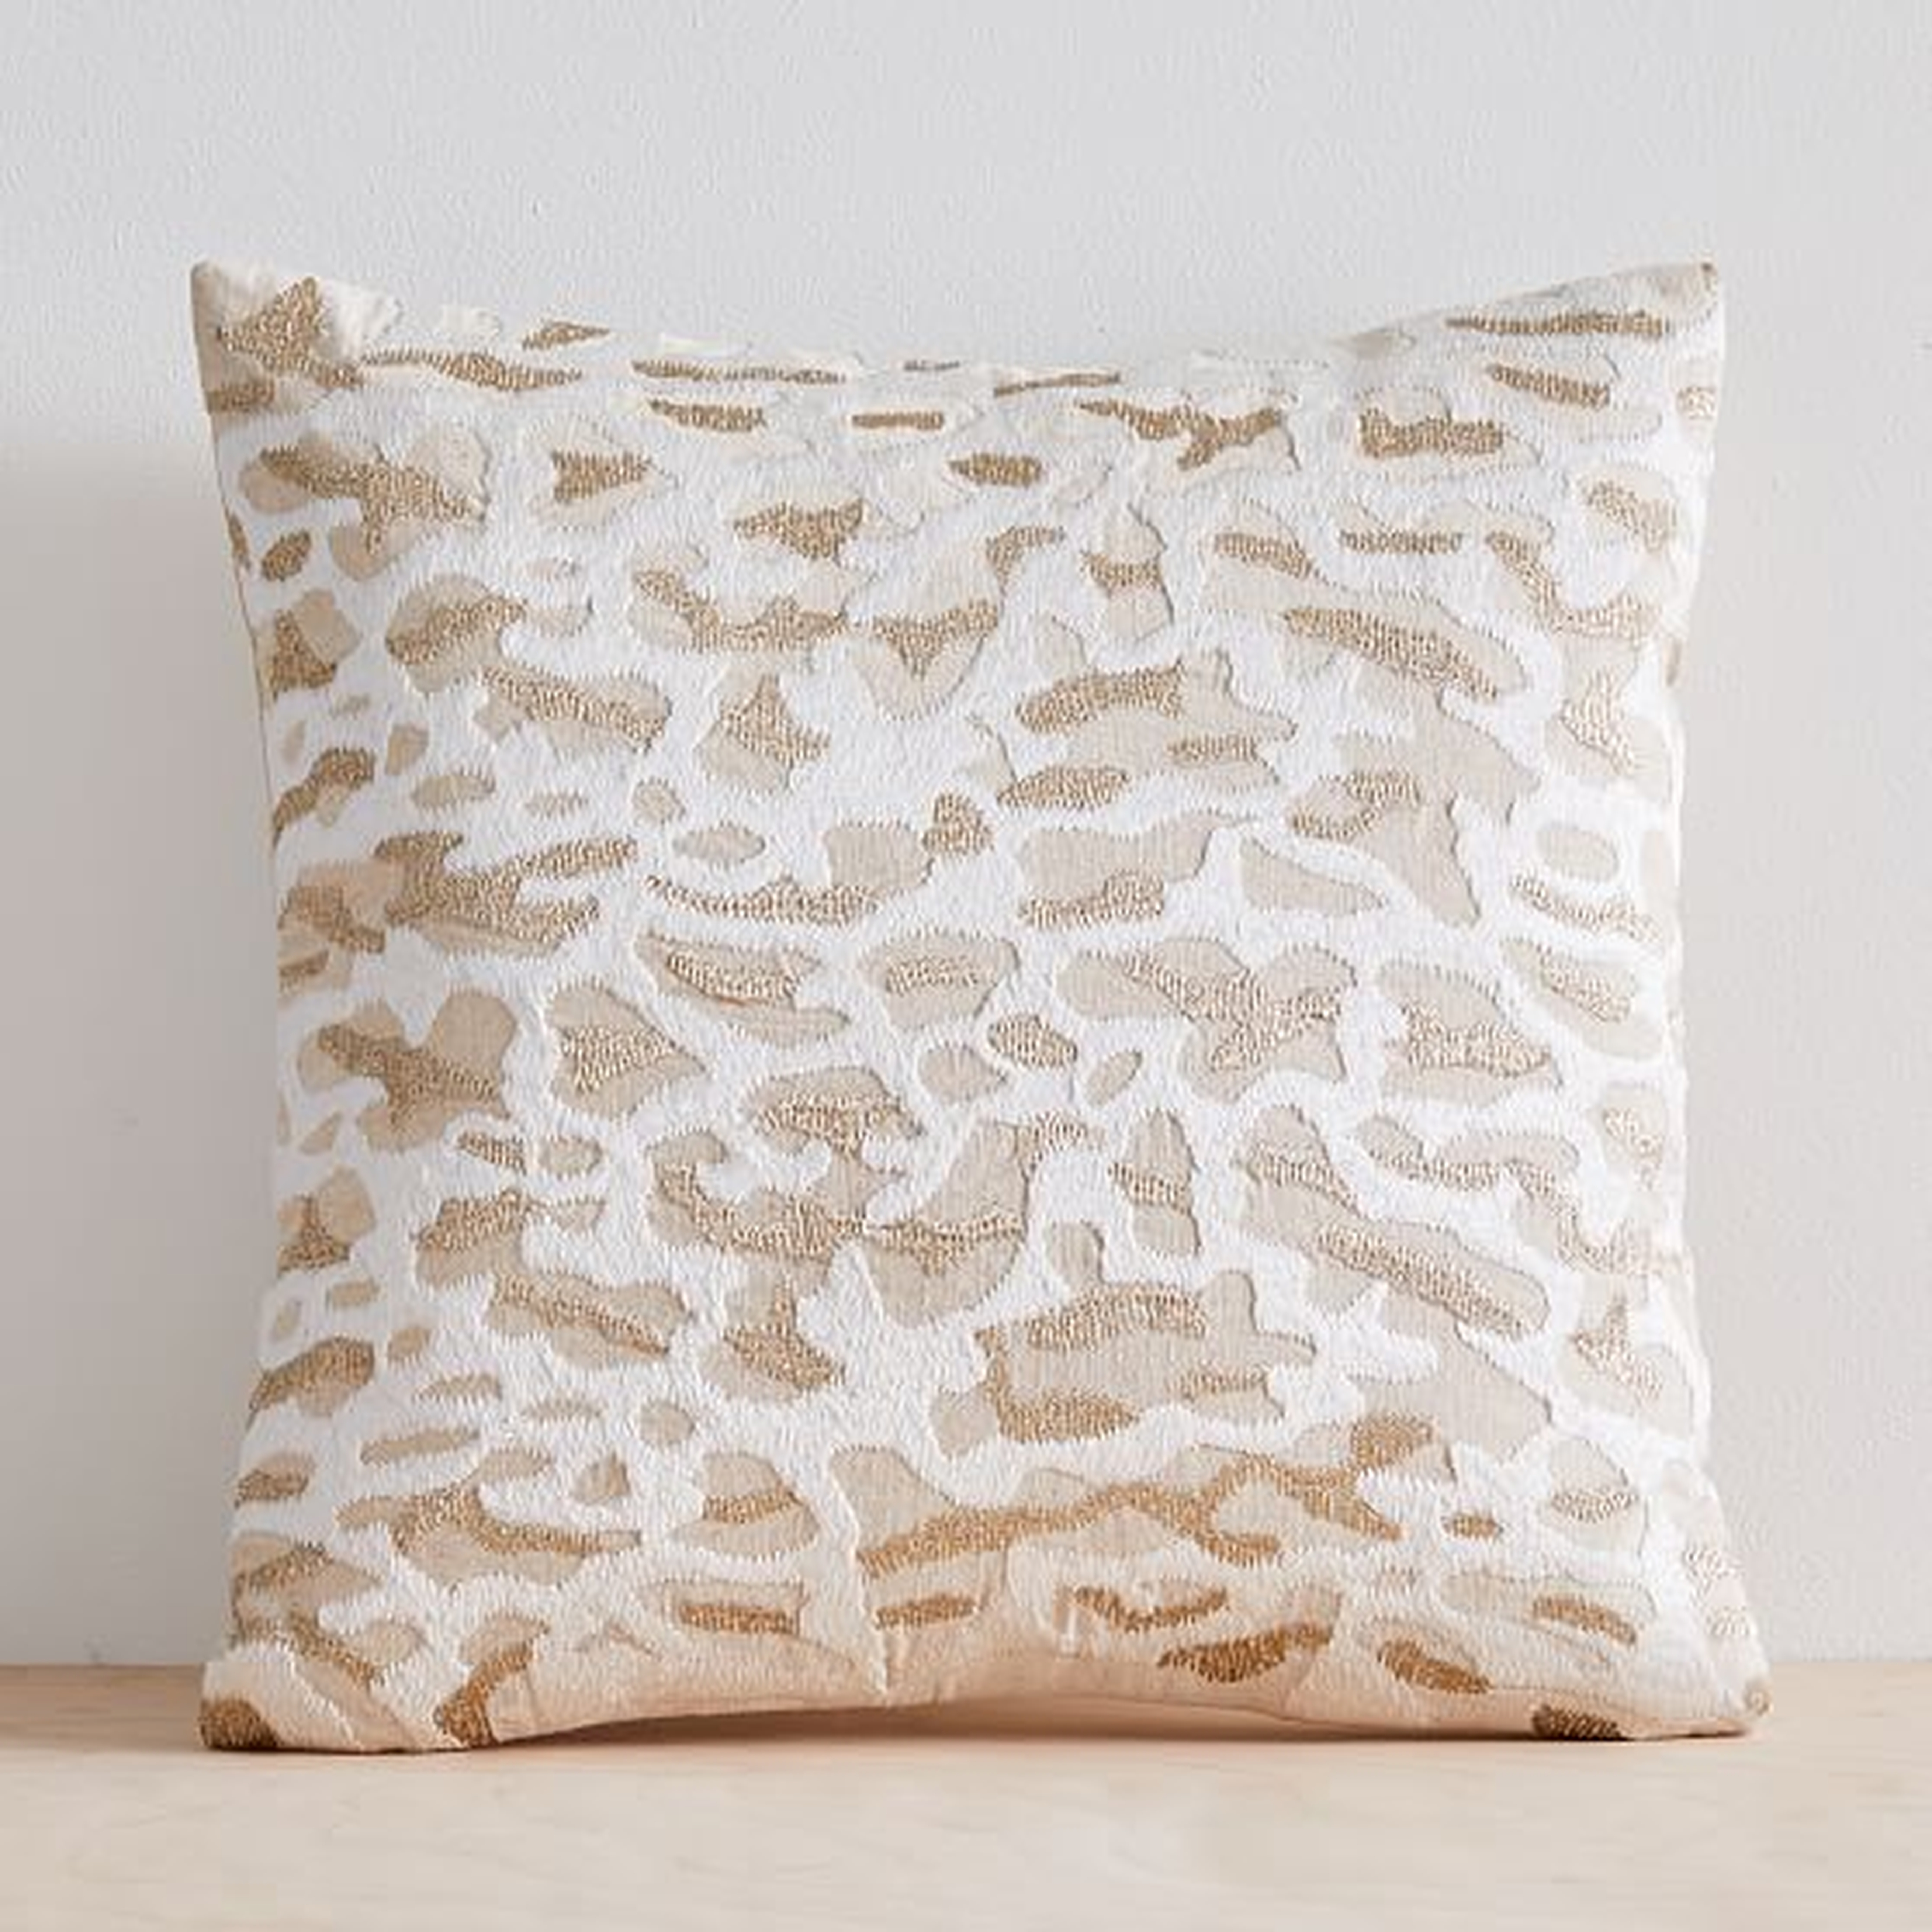 Embroidered Animal Print Pillow Cover, Set of 2, Metallic Gold, 20"x20" - West Elm